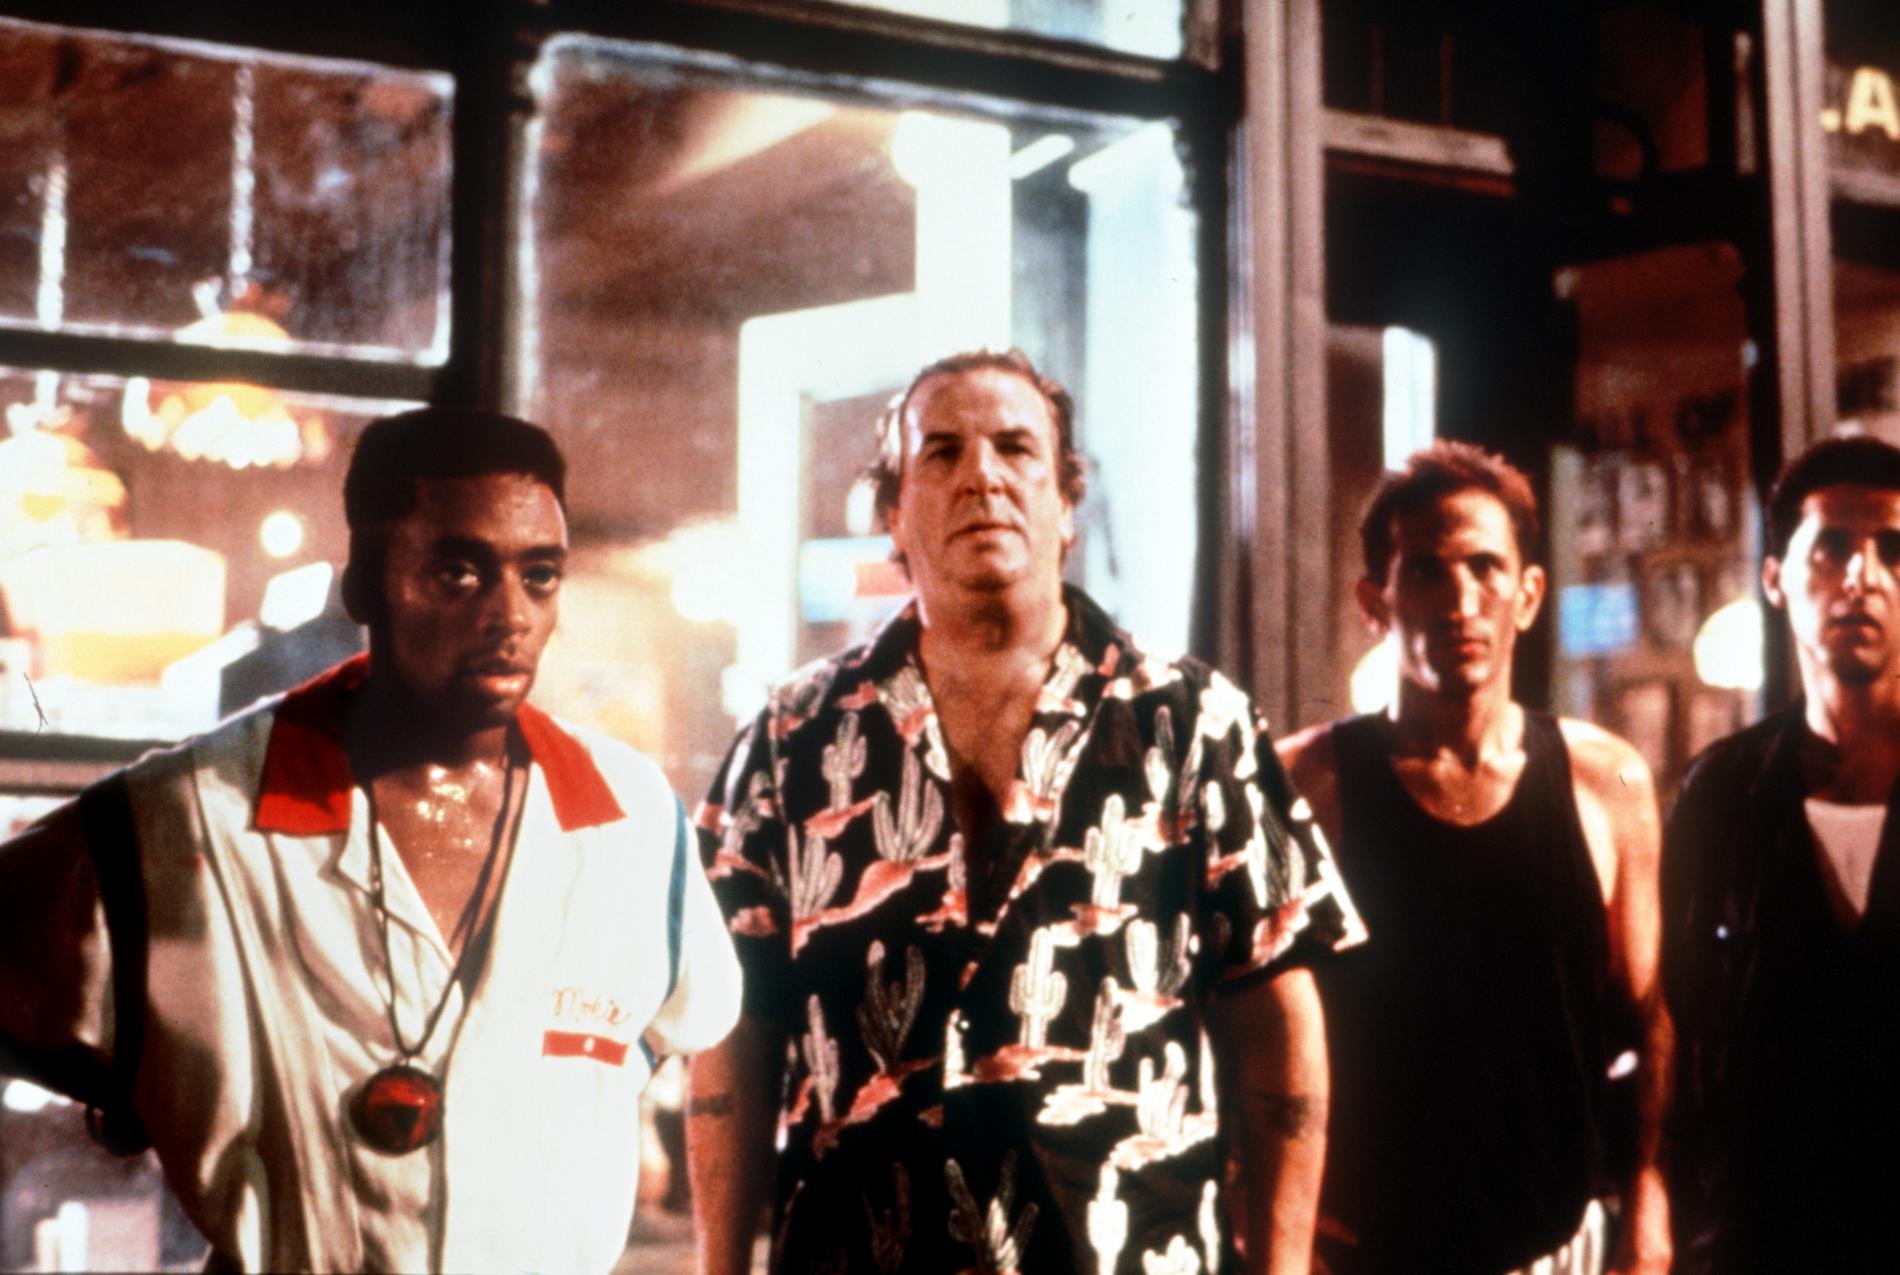  Spike Lee och Danny Aiello i ”Do the right thing”.